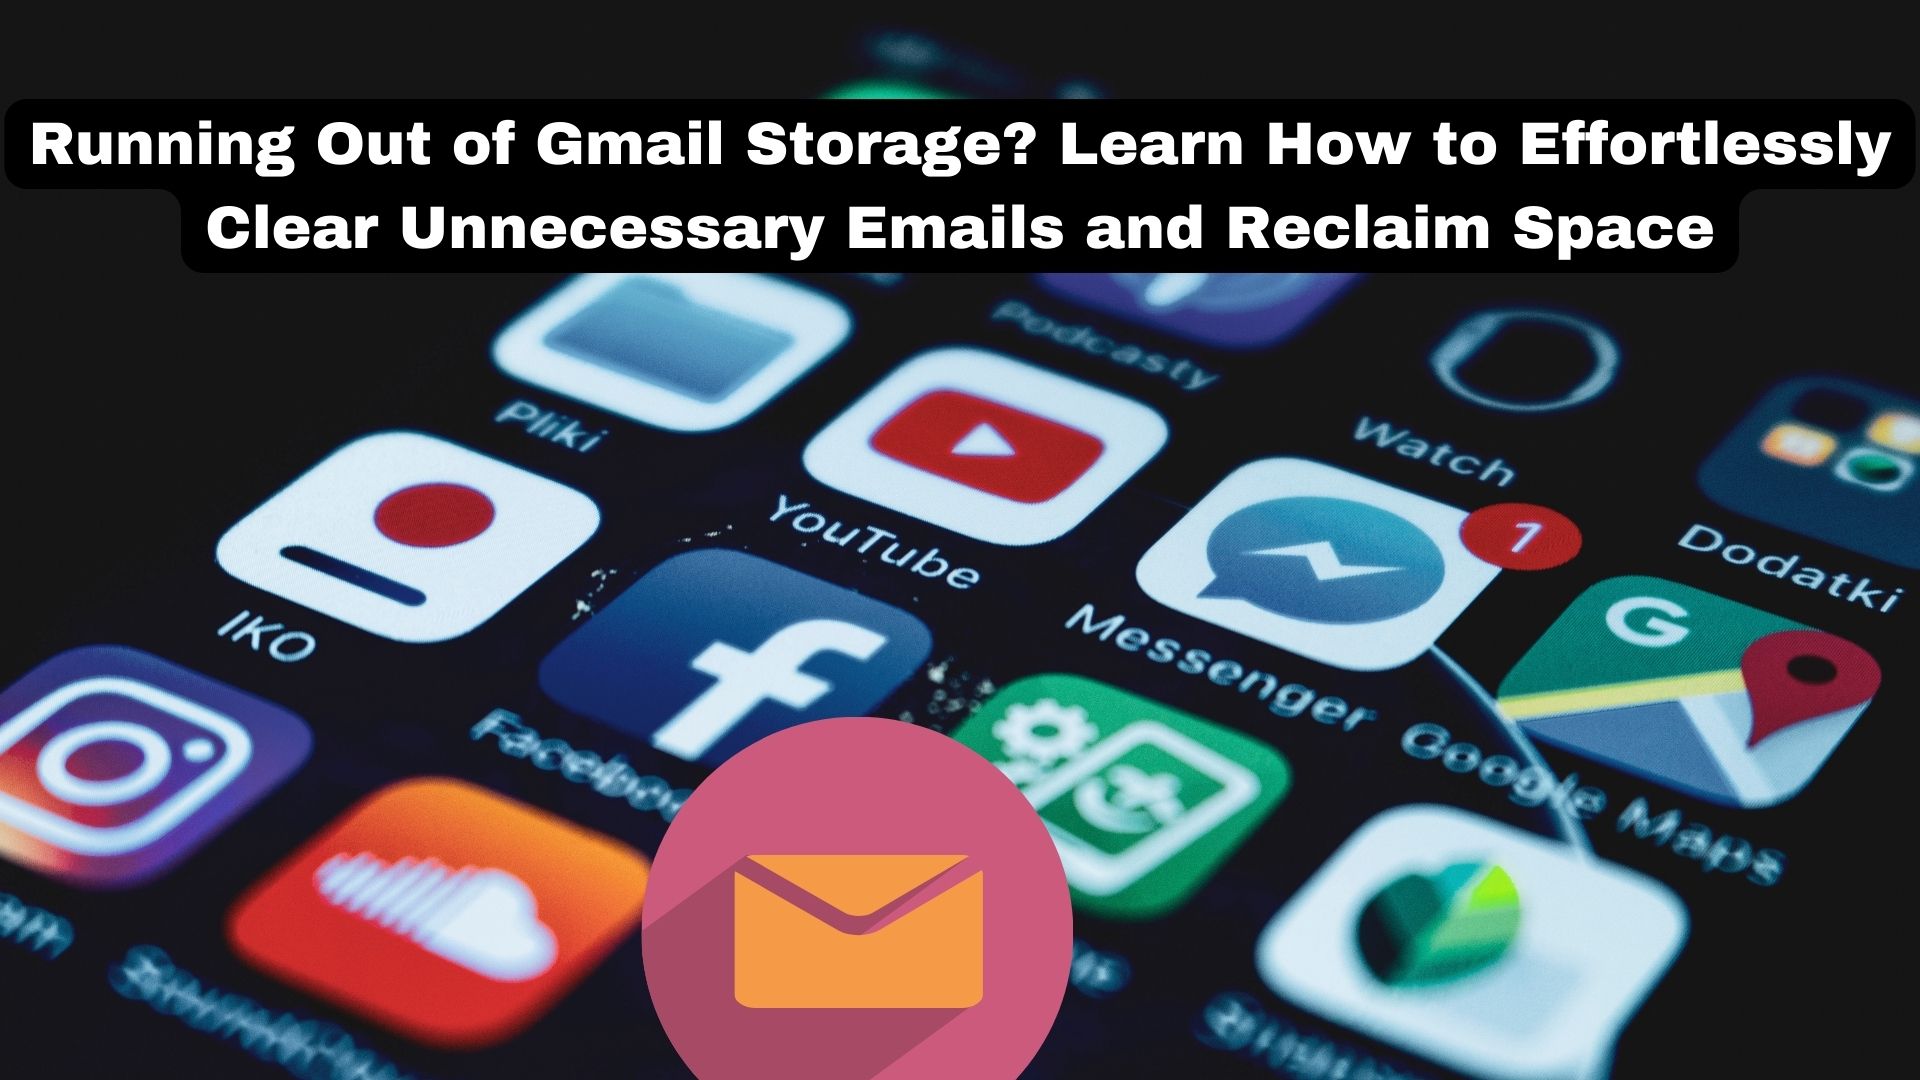 Running Out of Gmail Storage? Learn How to Effortlessly Clear Unnecessary Emails and Reclaim Space